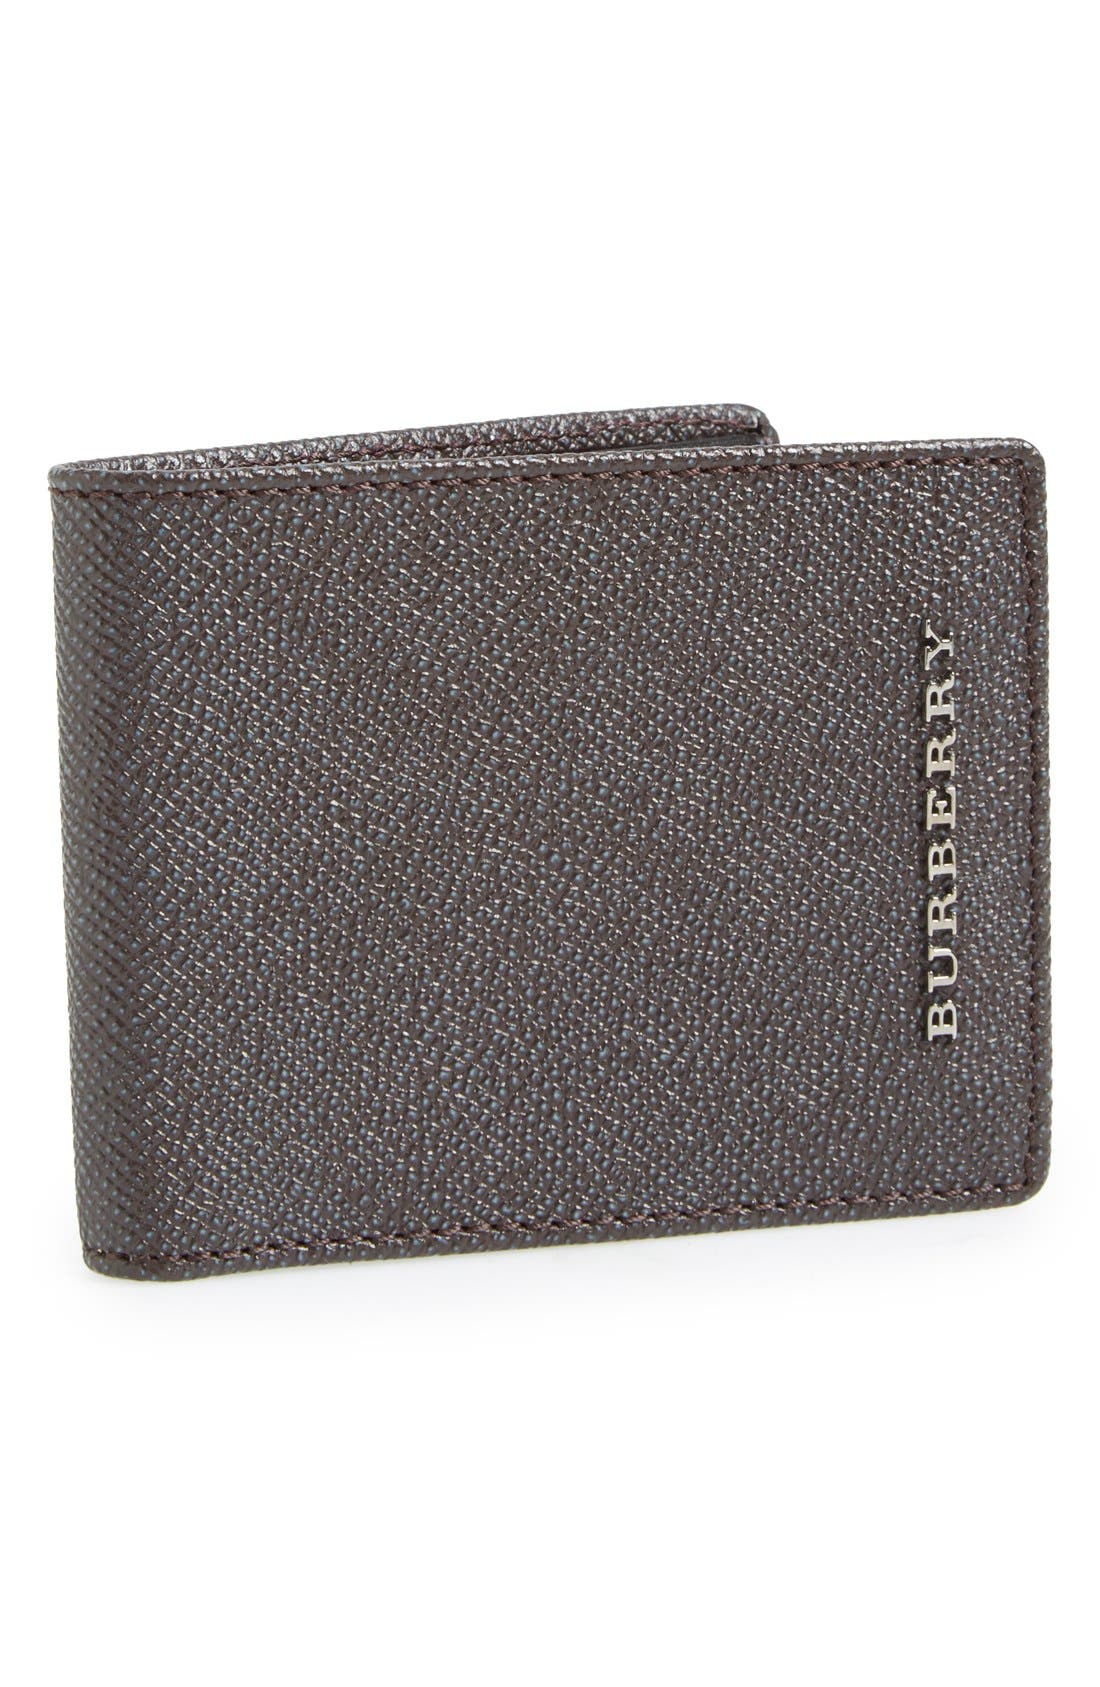 Burberry 'Hipfold' Leather Wallet 